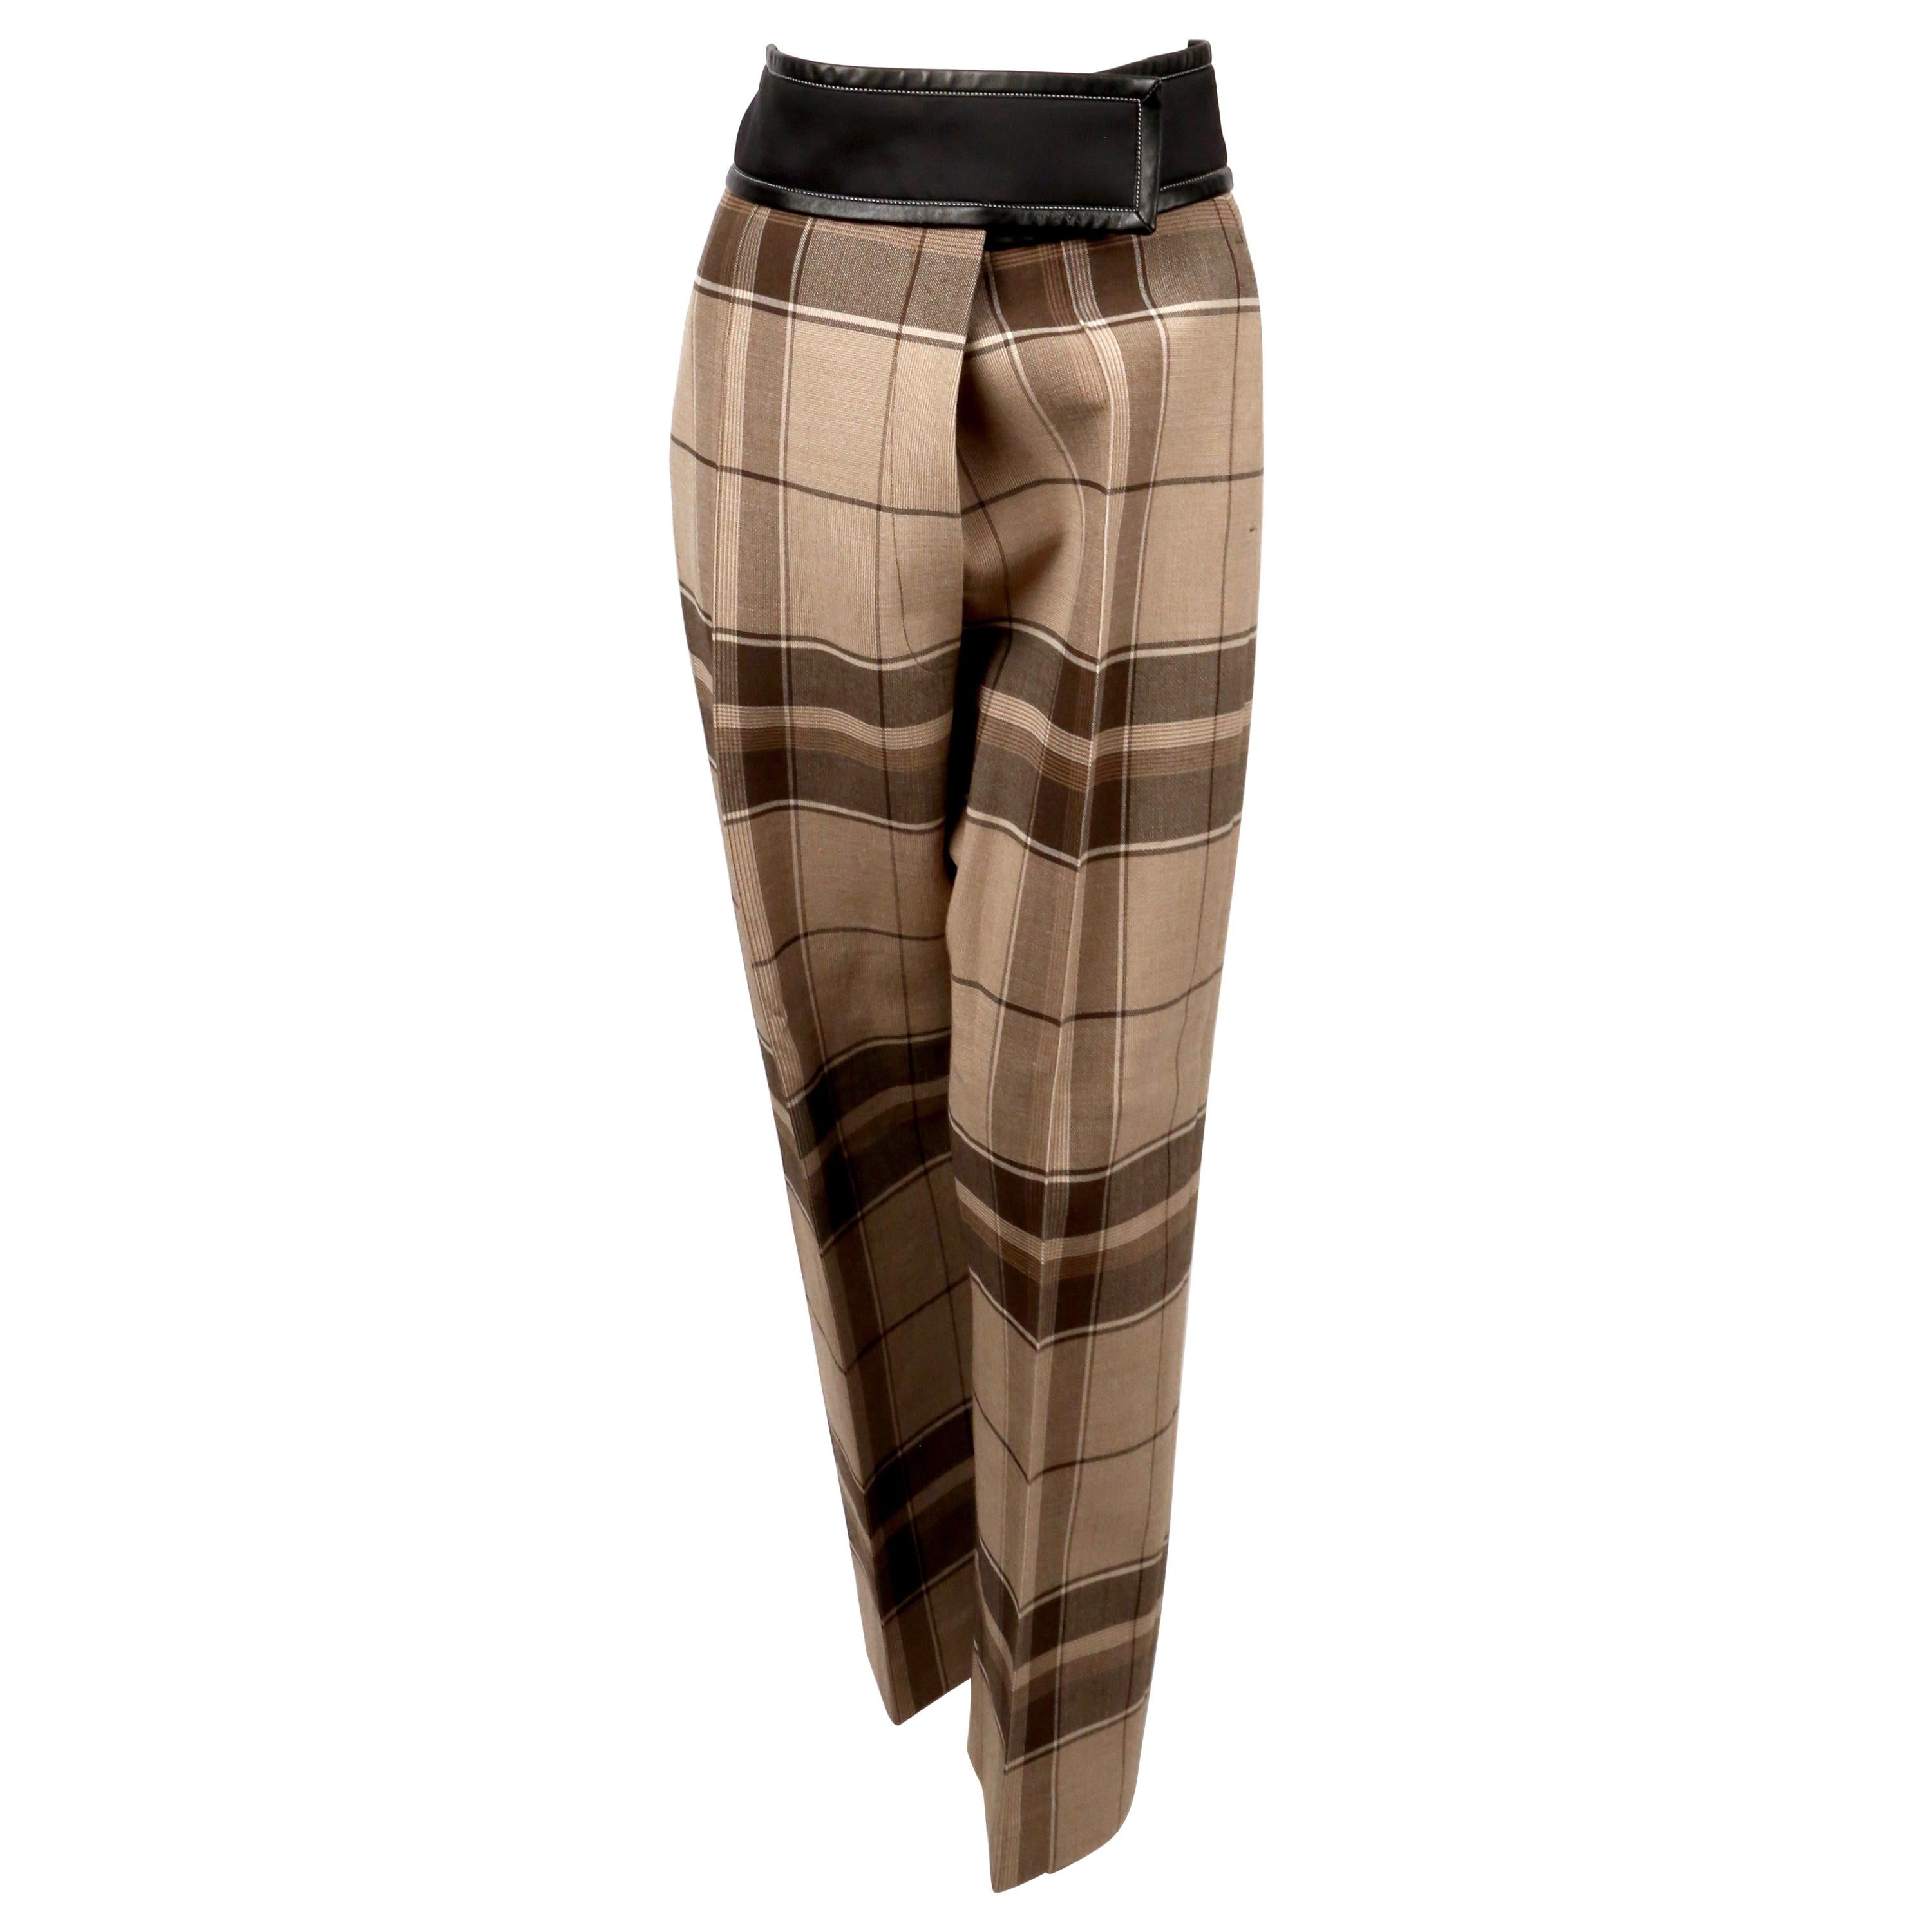 2016 CELINE by PHOEBE PHILO plaid runway pants with wrap waist- new For Sale